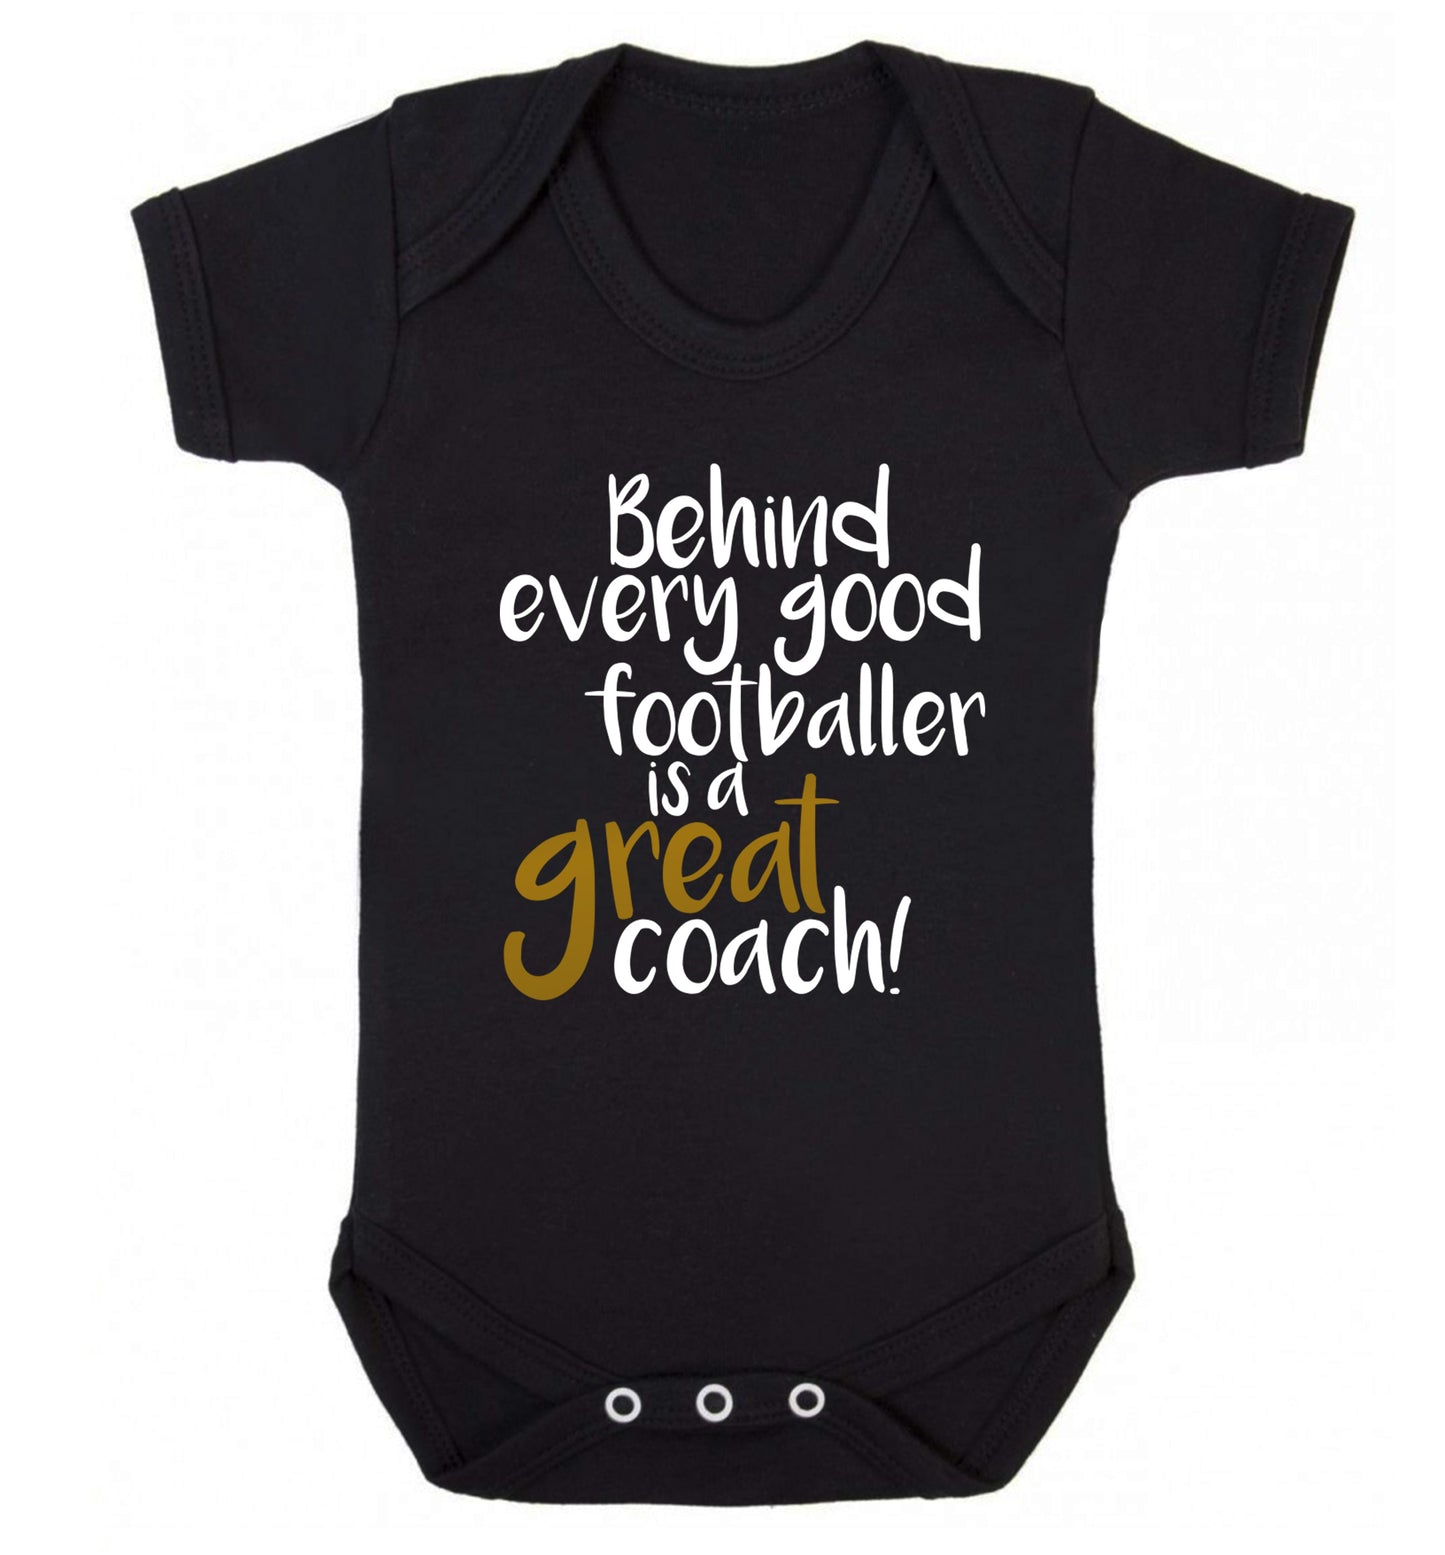 Behind every good footballer is a great coach! Baby Vest black 18-24 months